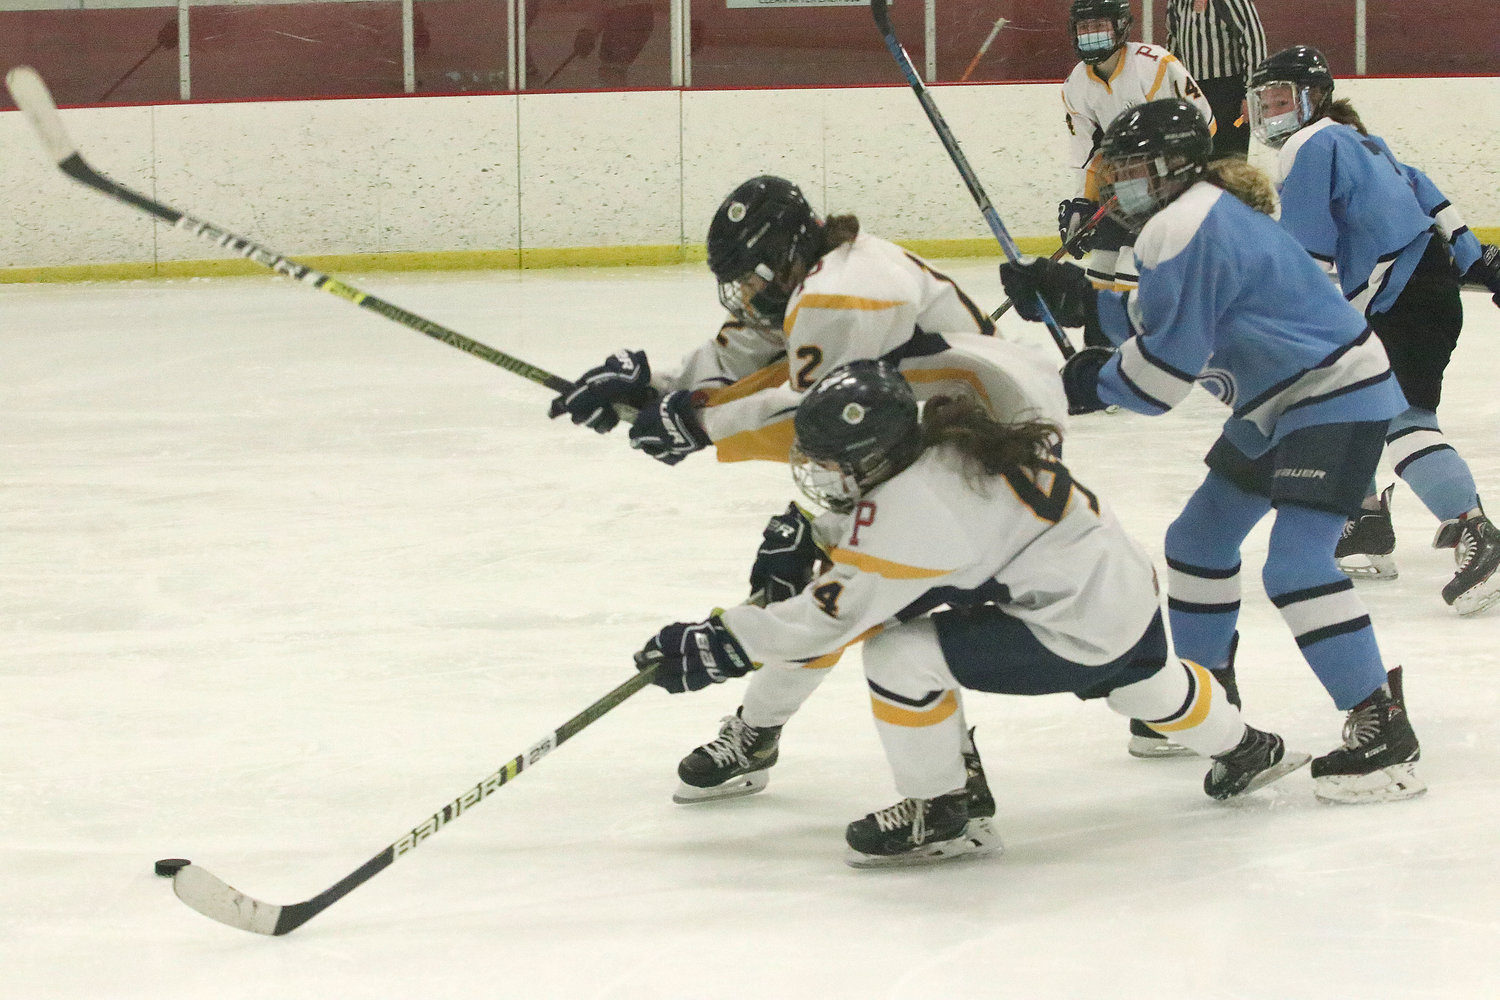 Kat Barker (left) and Marissa Levreault vie for the puck in front of the Narragansett goal in the third period of Game 2.